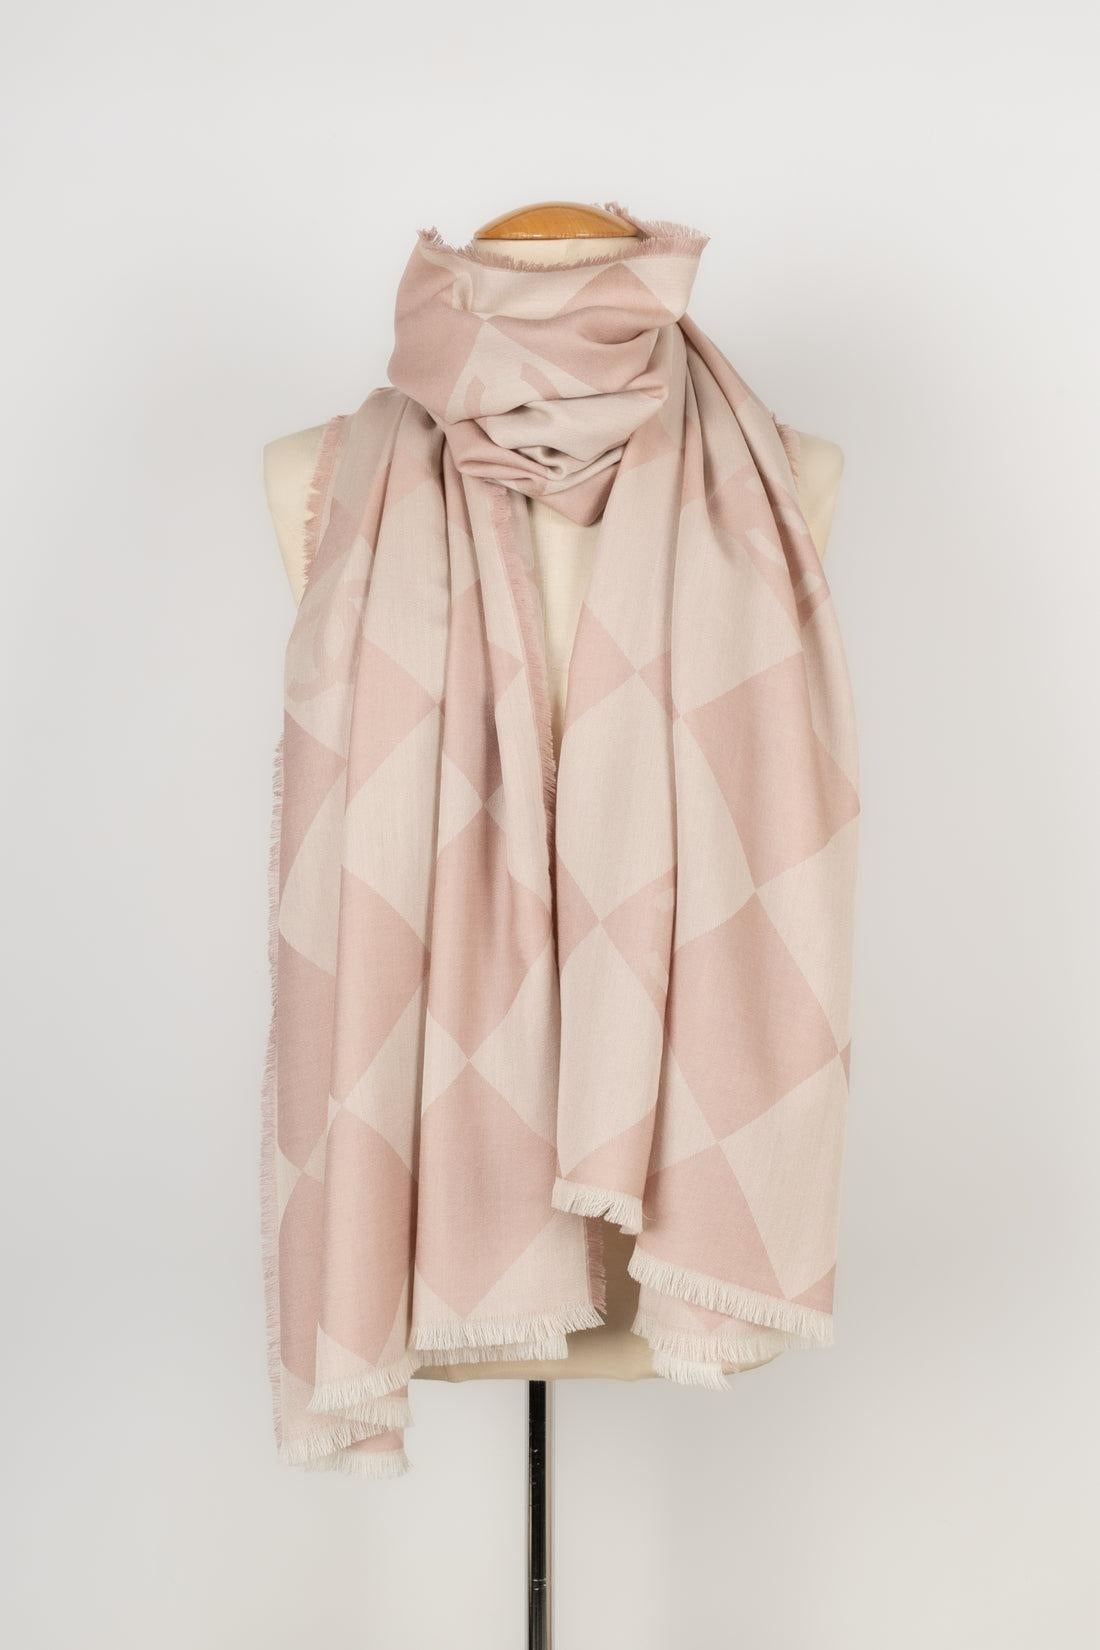 Chanel - (Made in Italy) Cashmere stole in pink tones.

Additional information:
Condition: Very good condition
Dimensions: about 70 cm x 200 cm

Seller Reference: FFC16